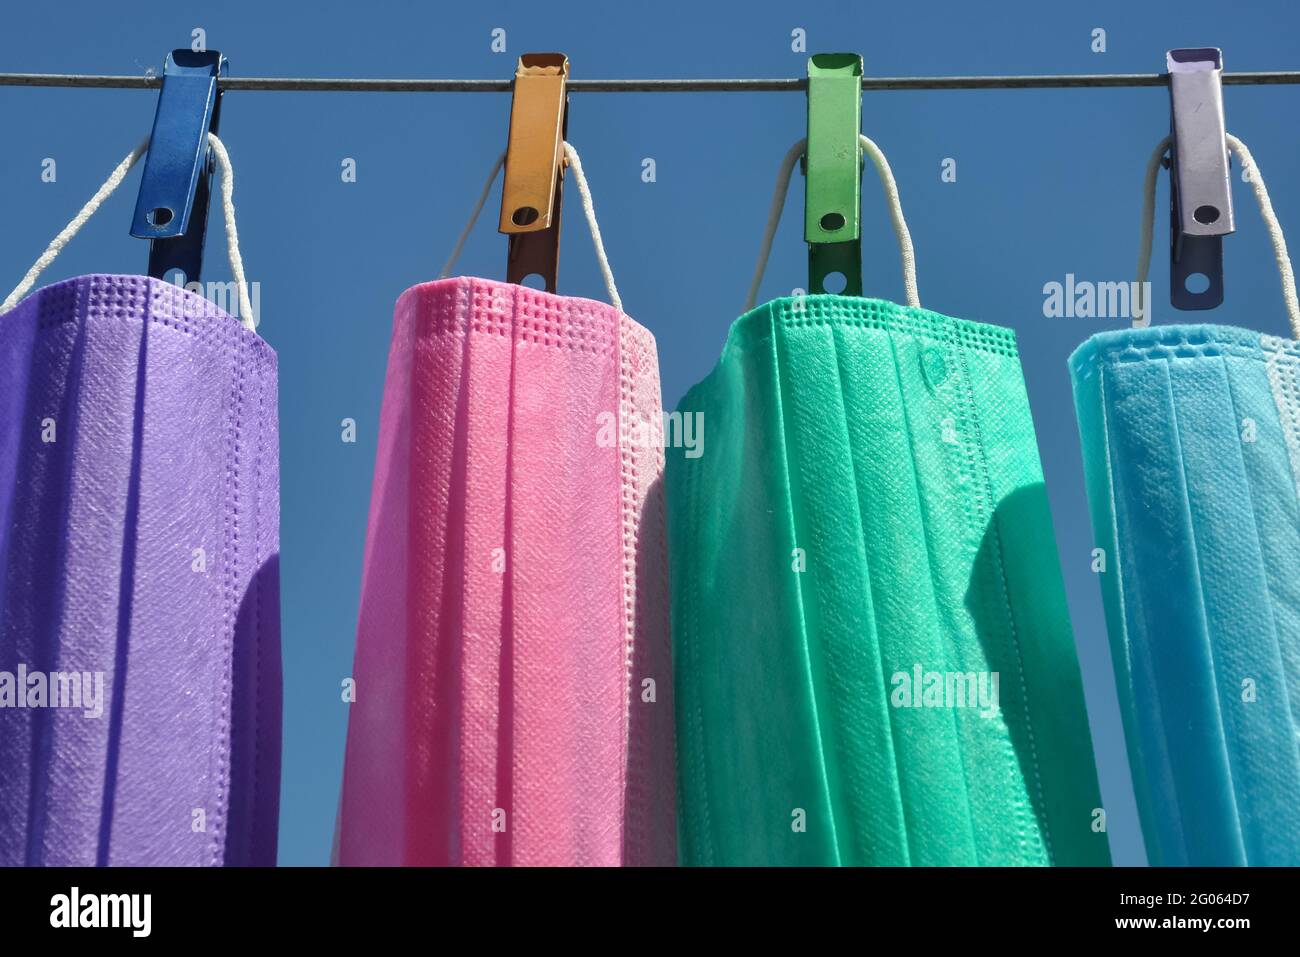 Front view of multi colored surgical face mask (Disposable mask) hanging on clothesline wire with clothespin, Concept of protect environment from waste and pollution. Stock Photo